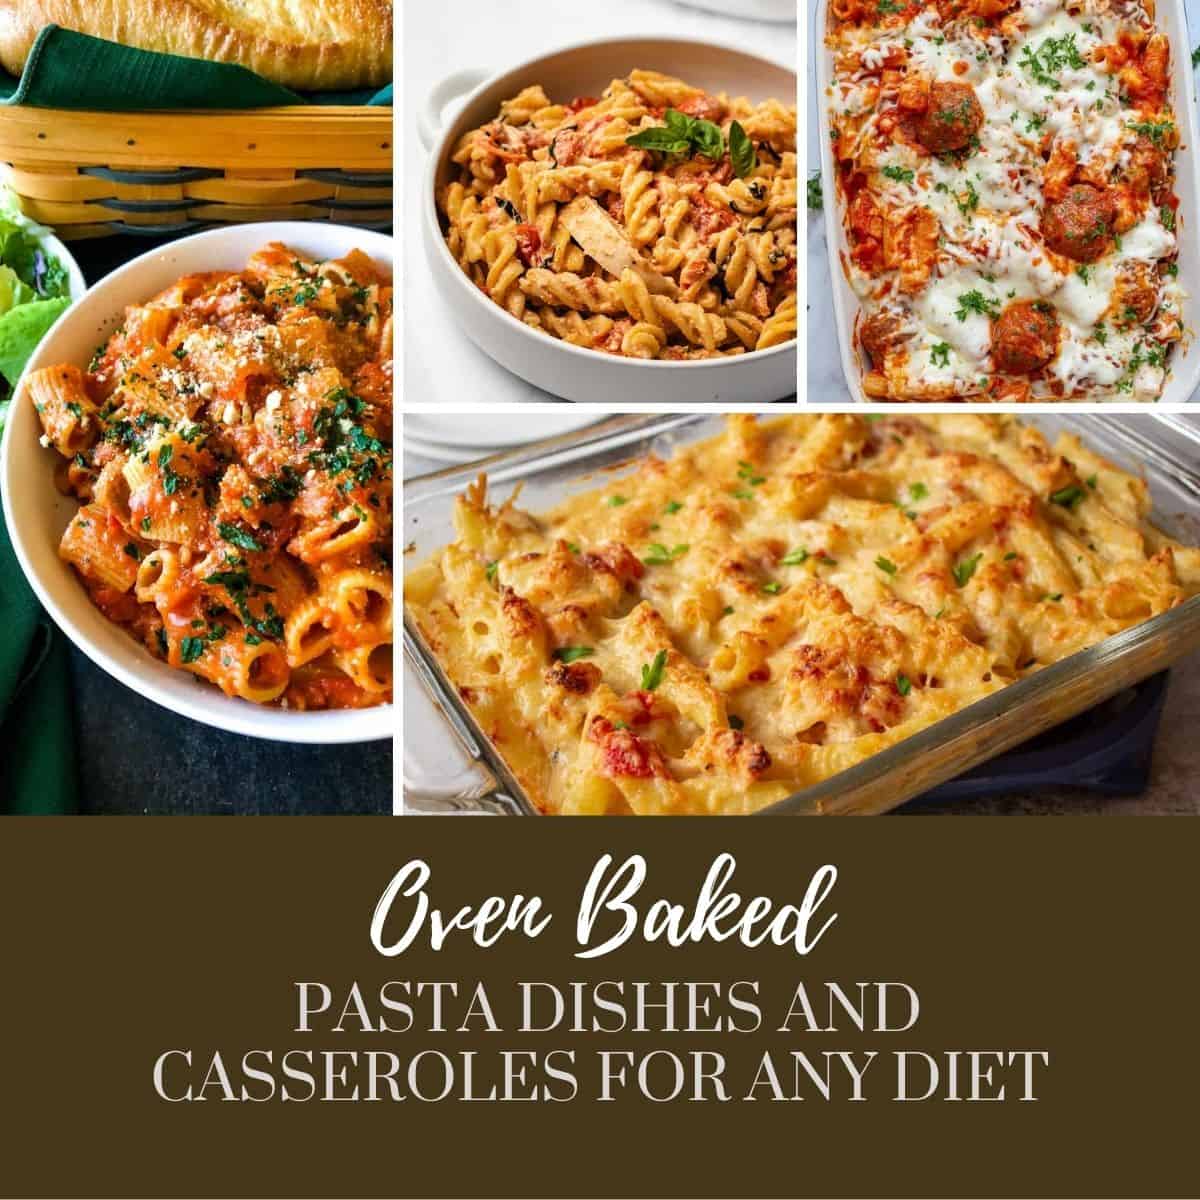 Baked Pasta Dishes Featured Image Collage